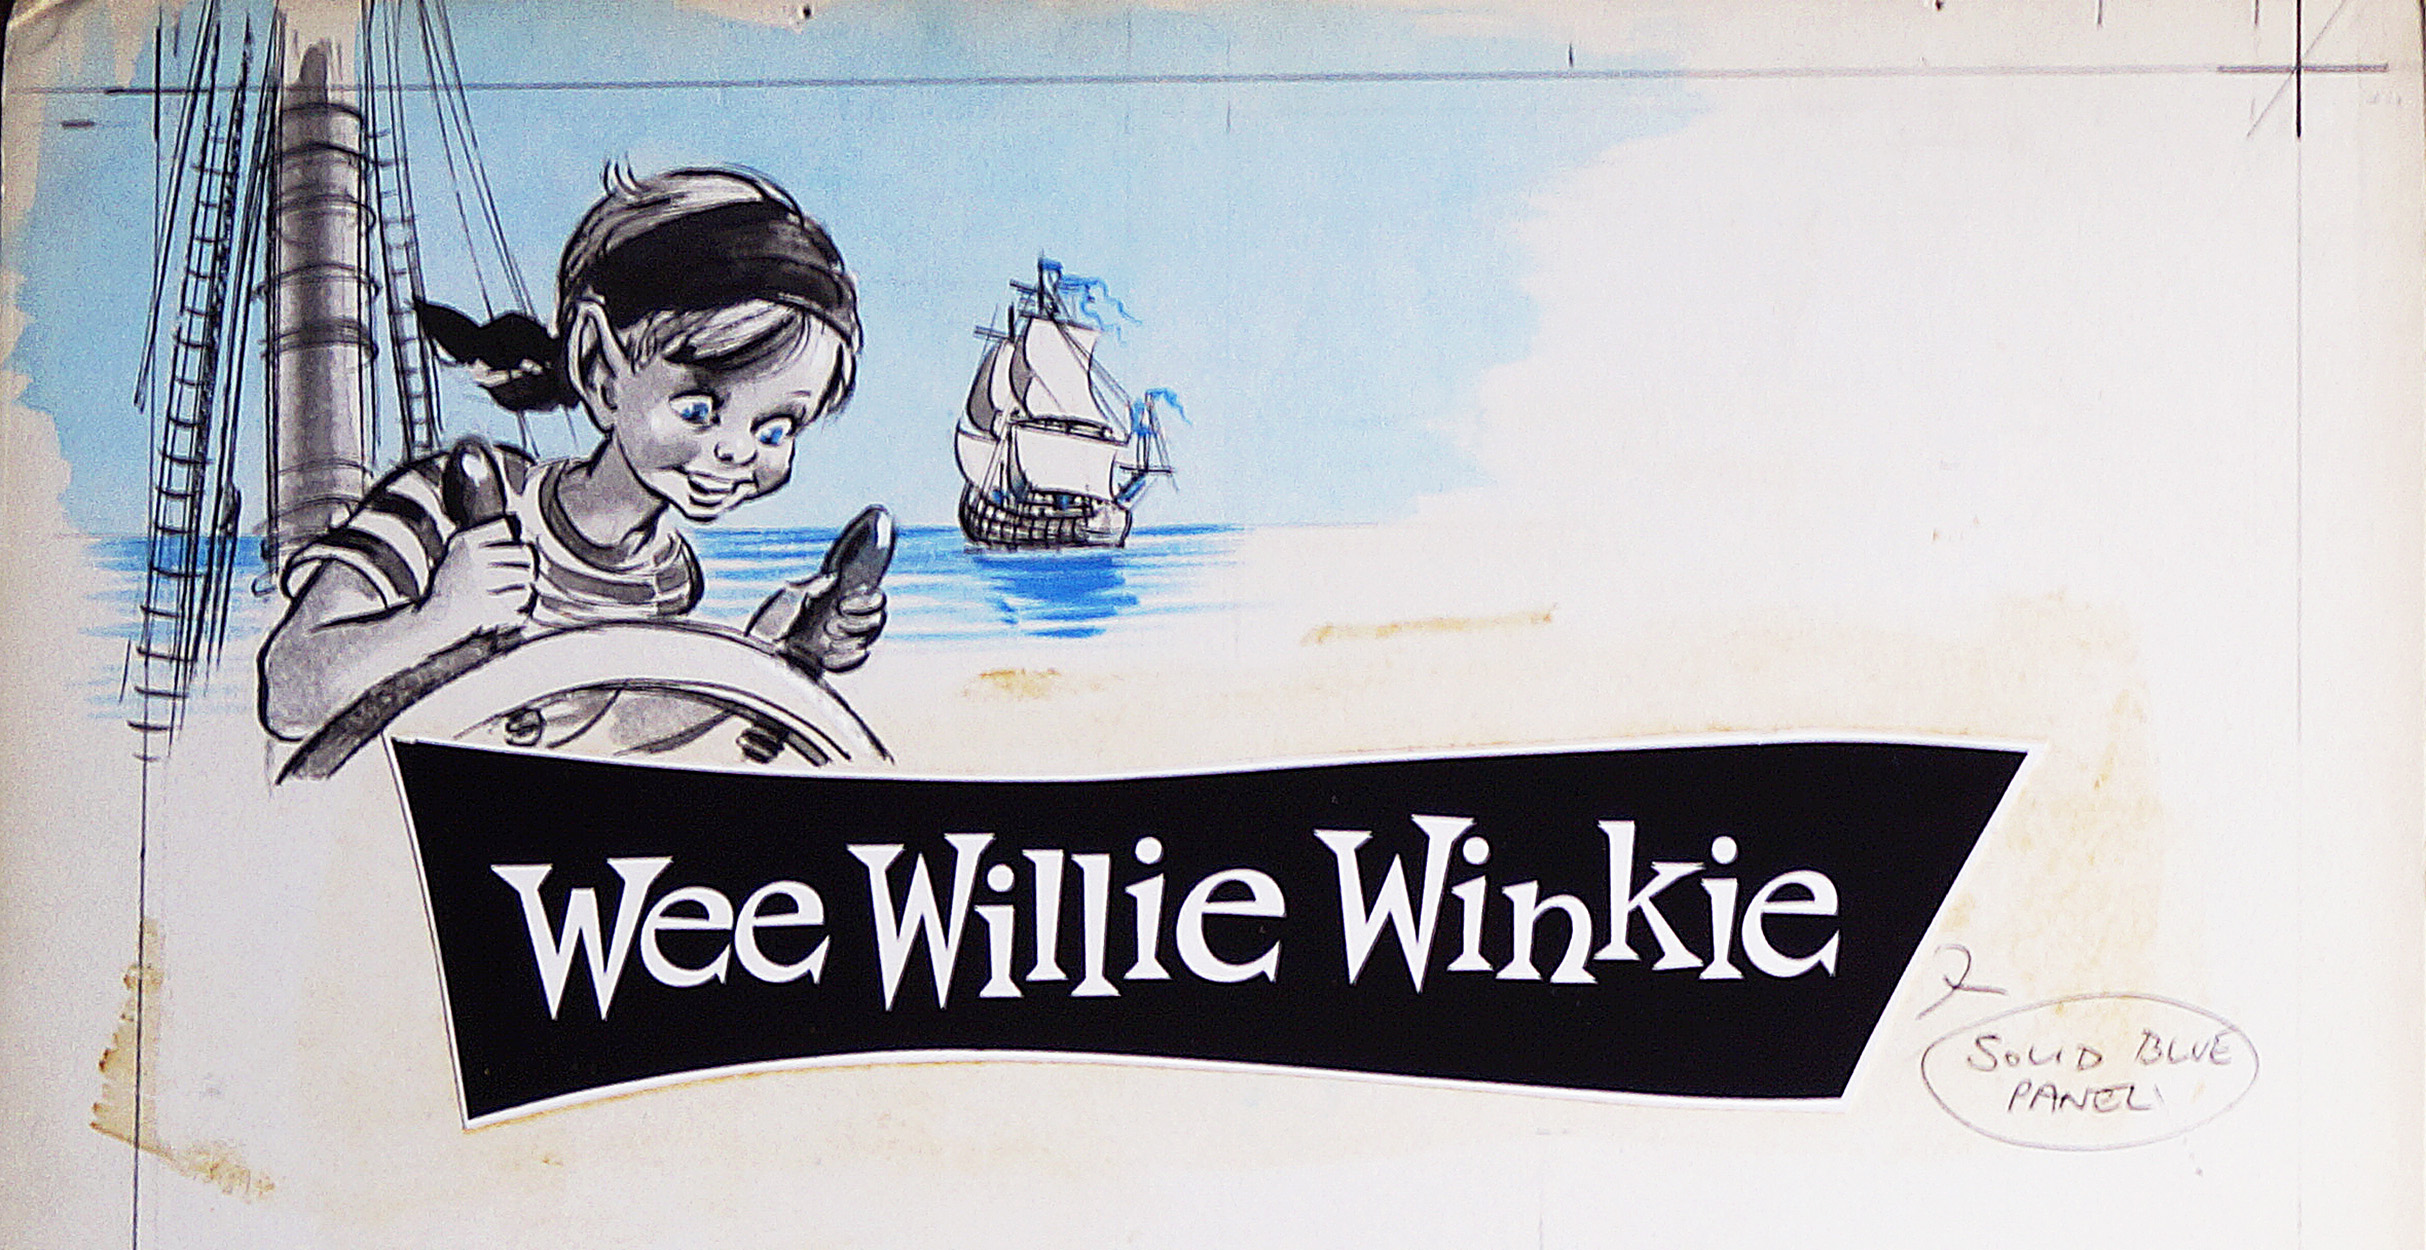 Willie at The Wheel (Original) art by Wee Willie Winkie (Worsley) at The Illustration Art Gallery